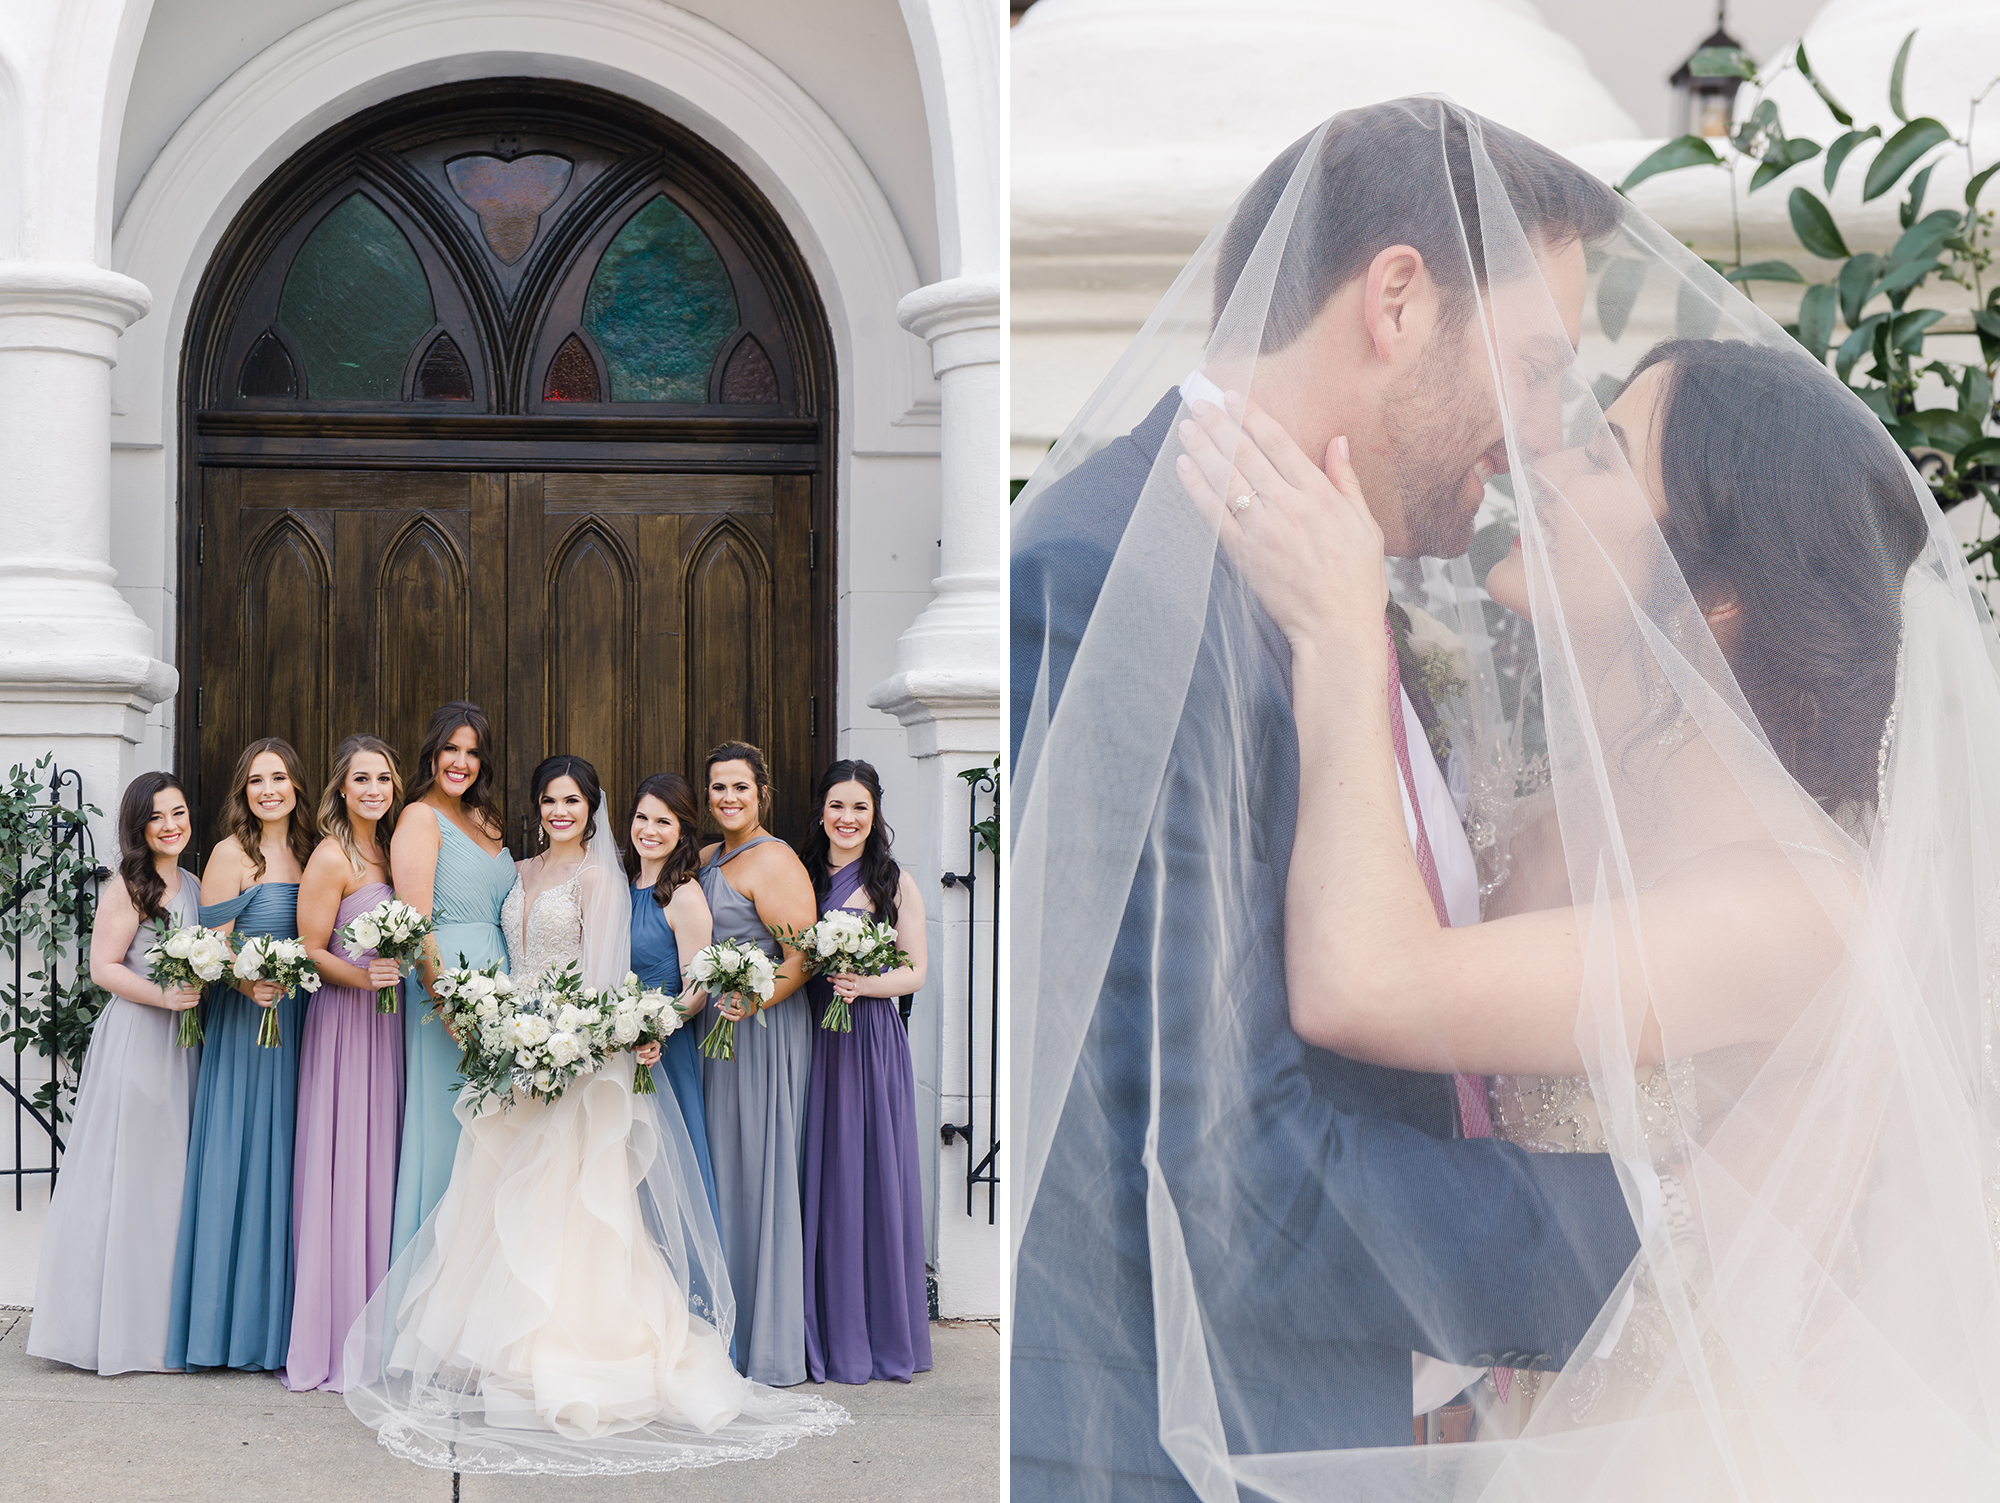 Bride and bridesmaids with bouquets; bride and groom under veil